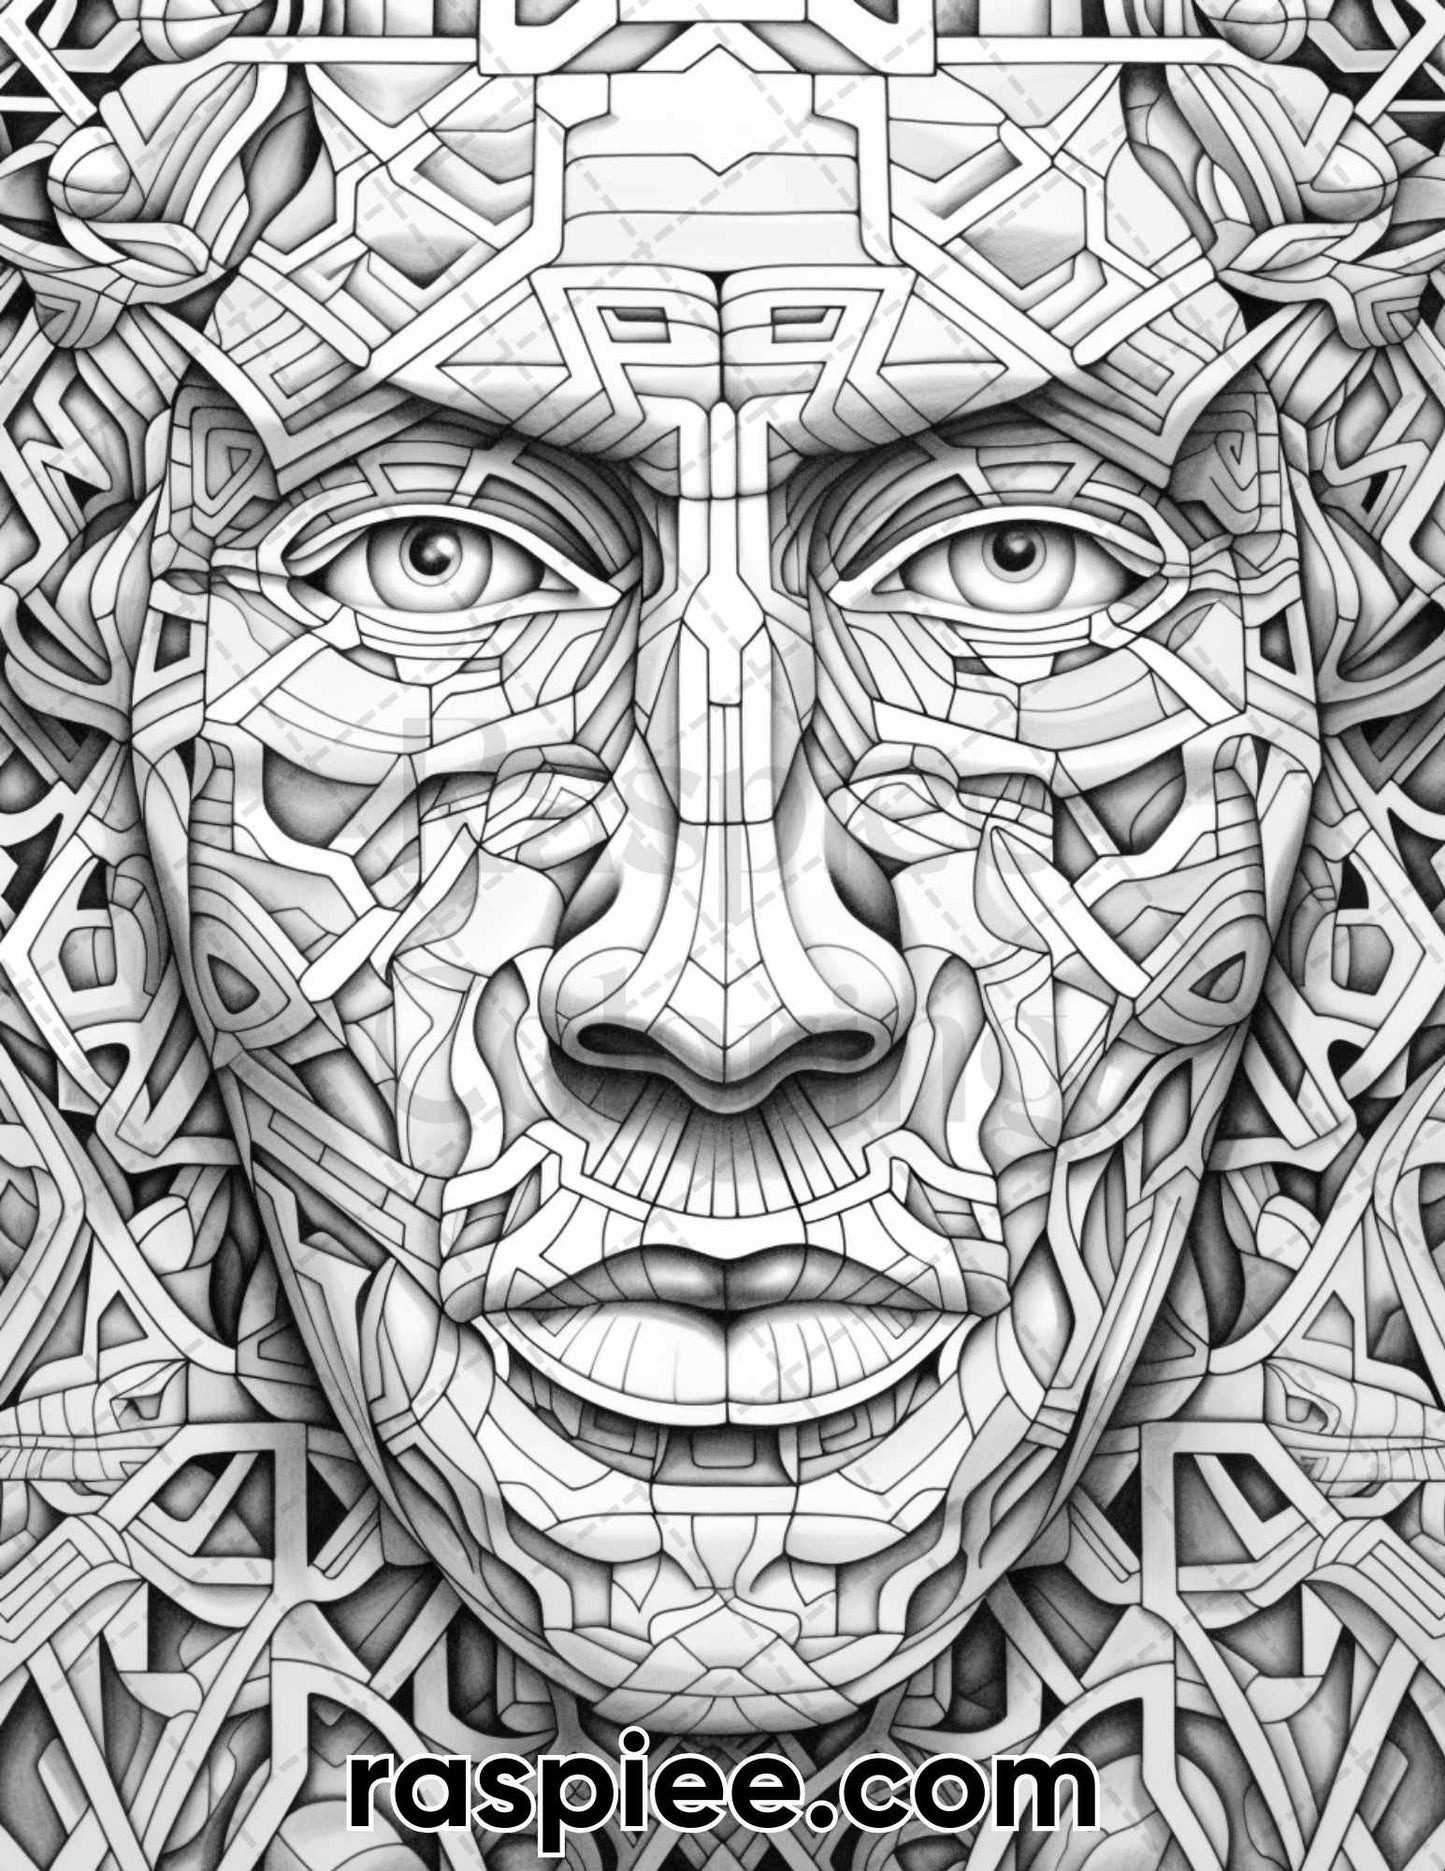 adult coloring pages, adult coloring sheets, adult coloring book pdf, adult coloring book printable, grayscale coloring pages, grayscale coloring books, portrait coloring pages, portrait coloring book, abstract faces coloring pages